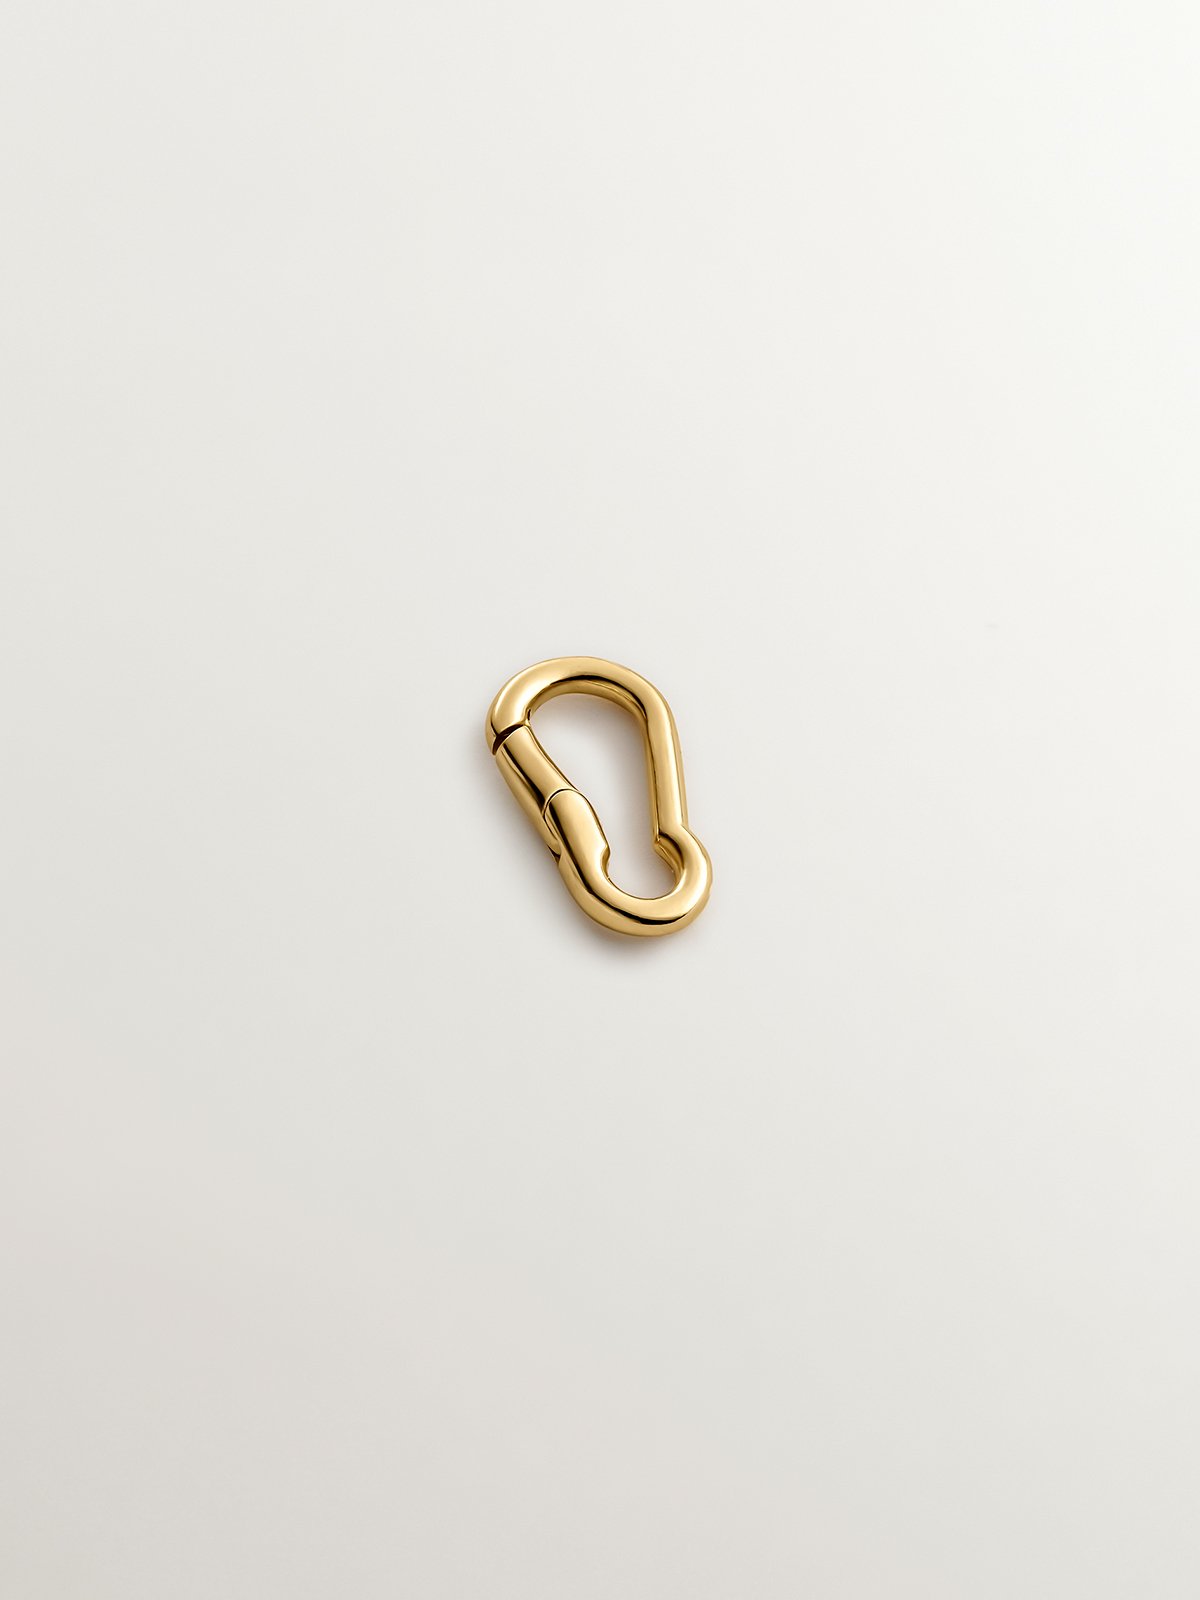 925 Silver carabiner charm plated in 18K yellow gold